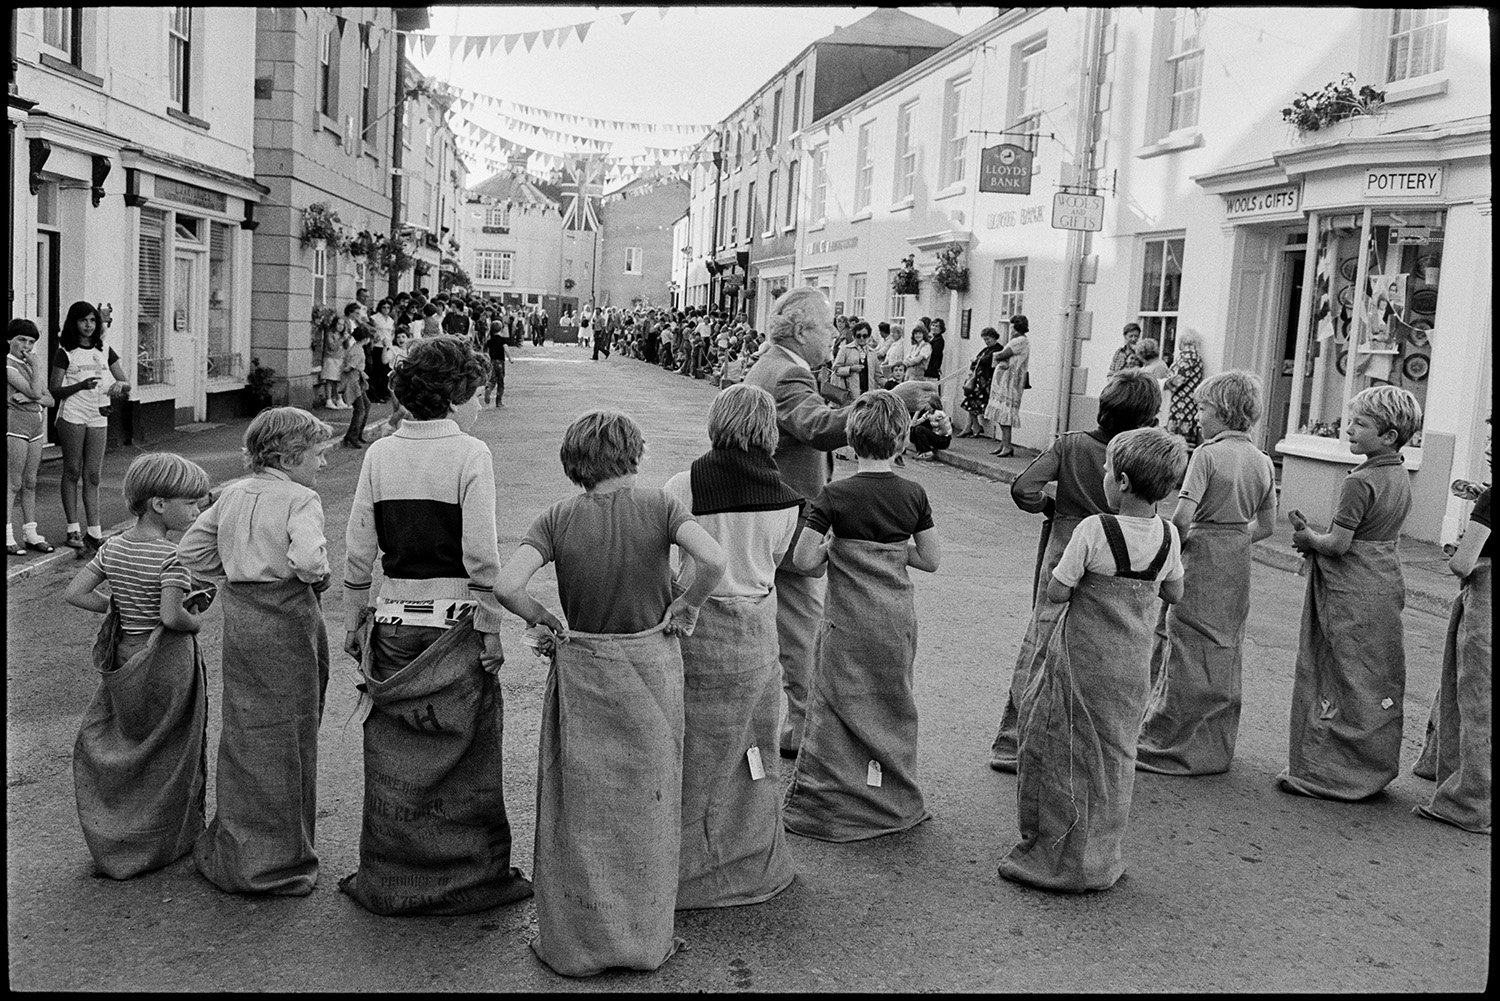 Sack race, eating buns on string in street. 
[Boys lined up ready for a sack race in a street in Chulmleigh at Chulmleigh Fair. The street is decorated with bunting and spectators are lining the pavements ready to watch the race. A sing for Lloyds bank can be seen on one of the buildings.]